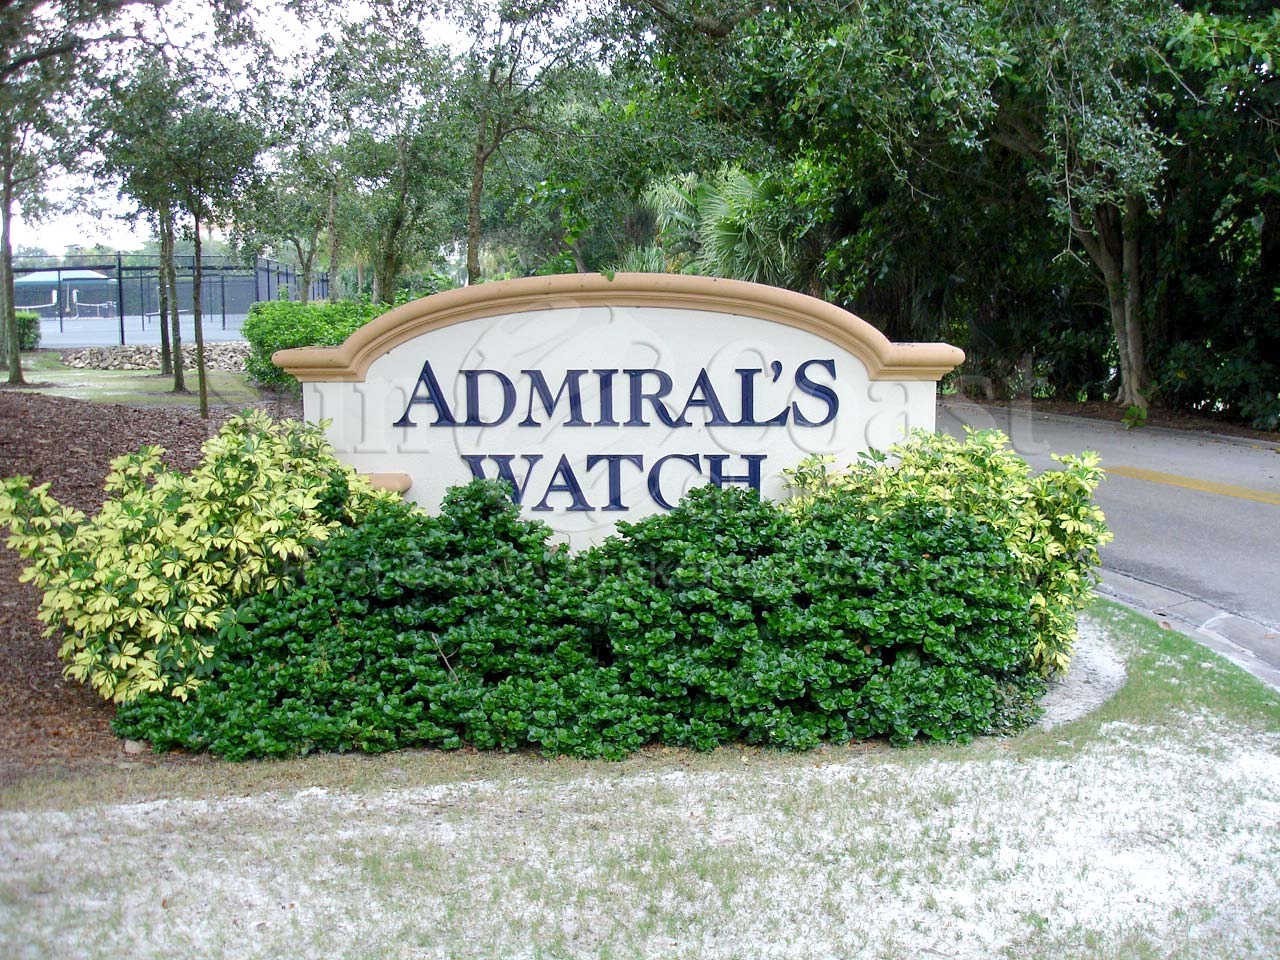 Admirals Watch at Windstar entrance sign, non gated community within the gated Windstar community